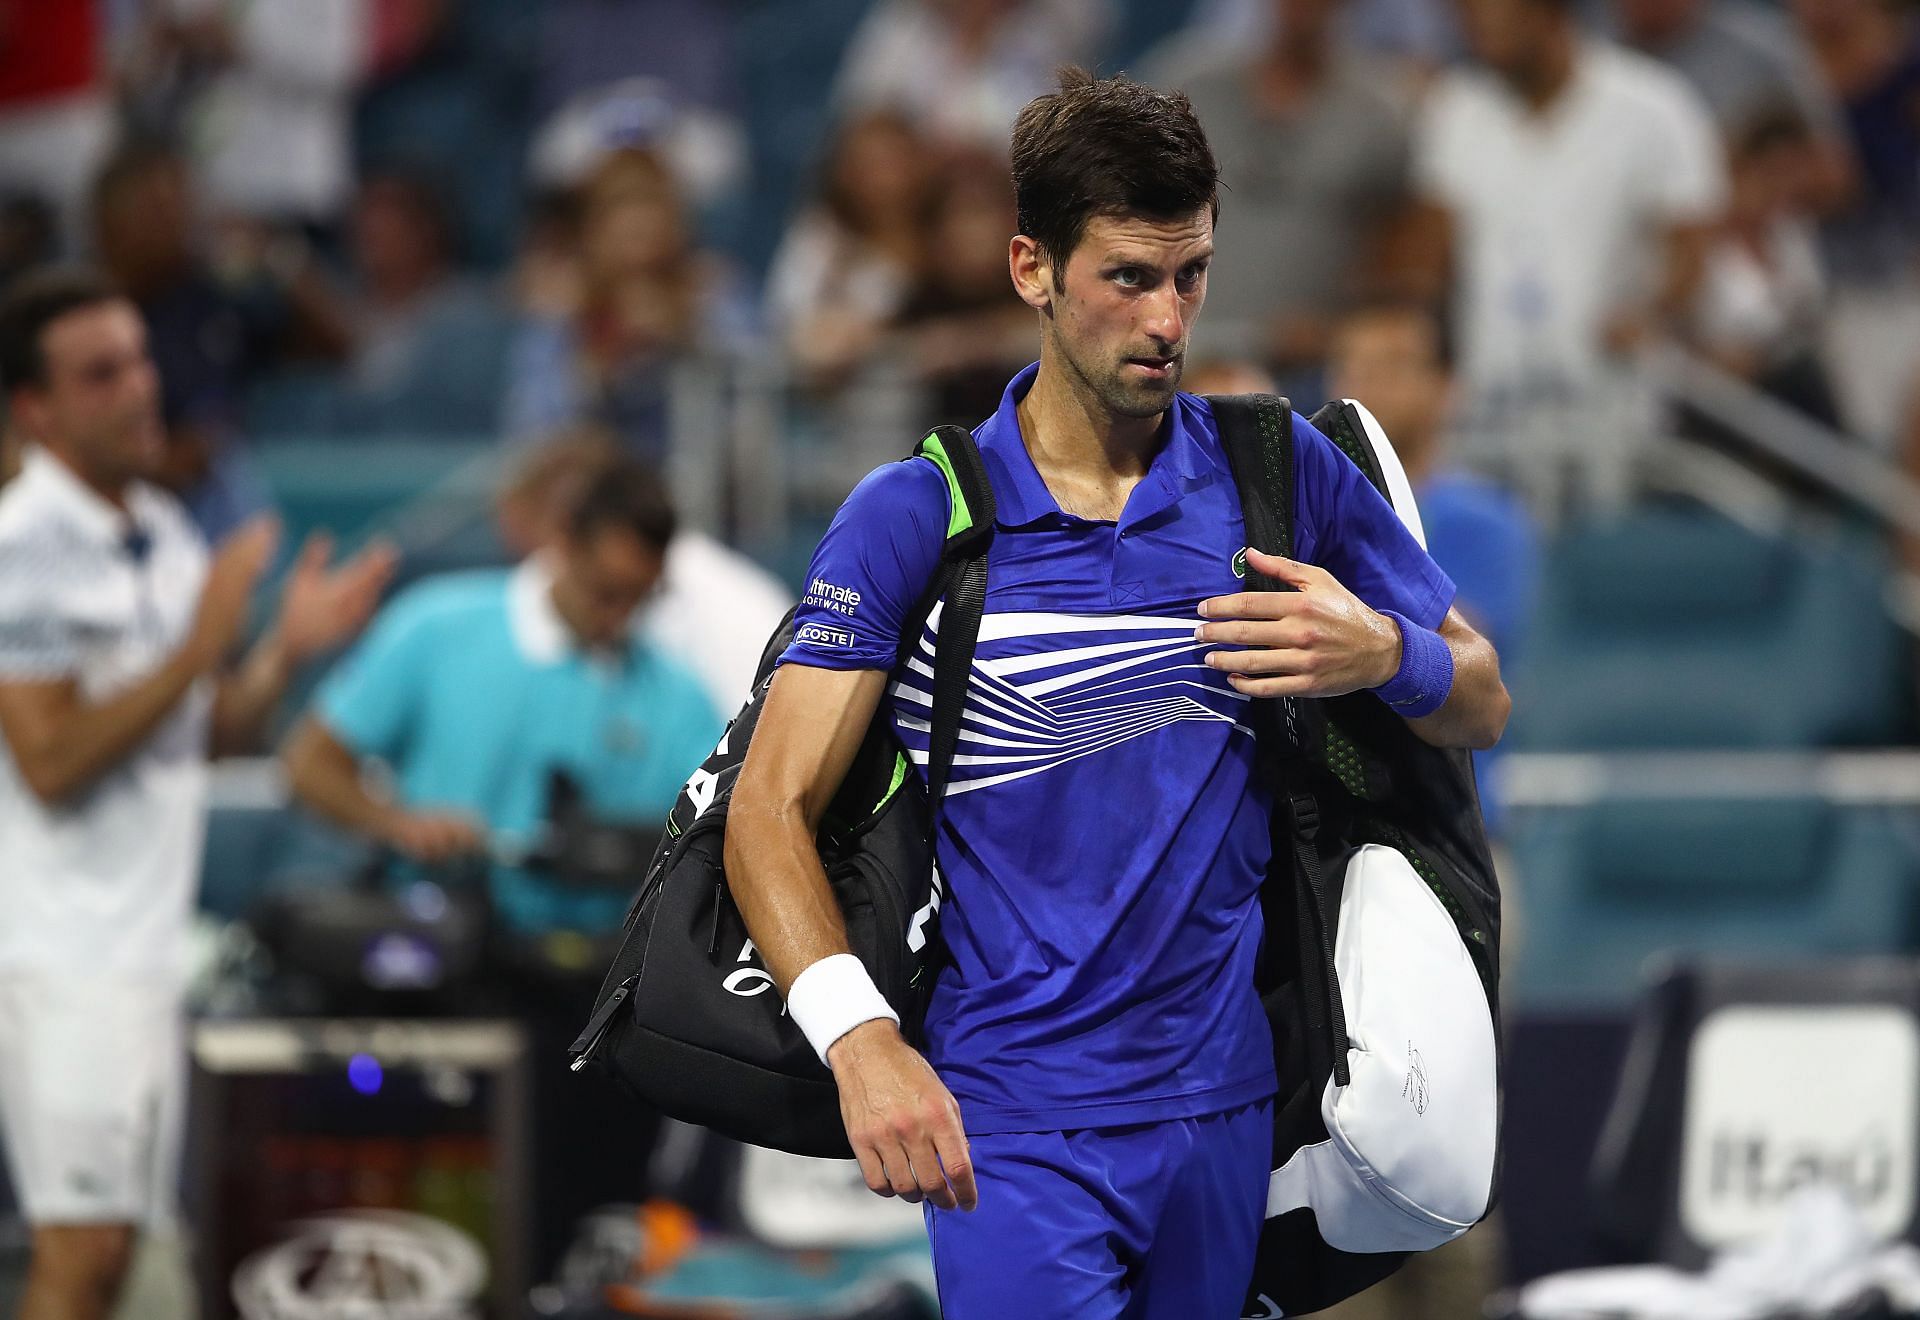 Novak Djokovic may have to skip the Miami Masters as well if he cannot play at the Indian Wells Masters